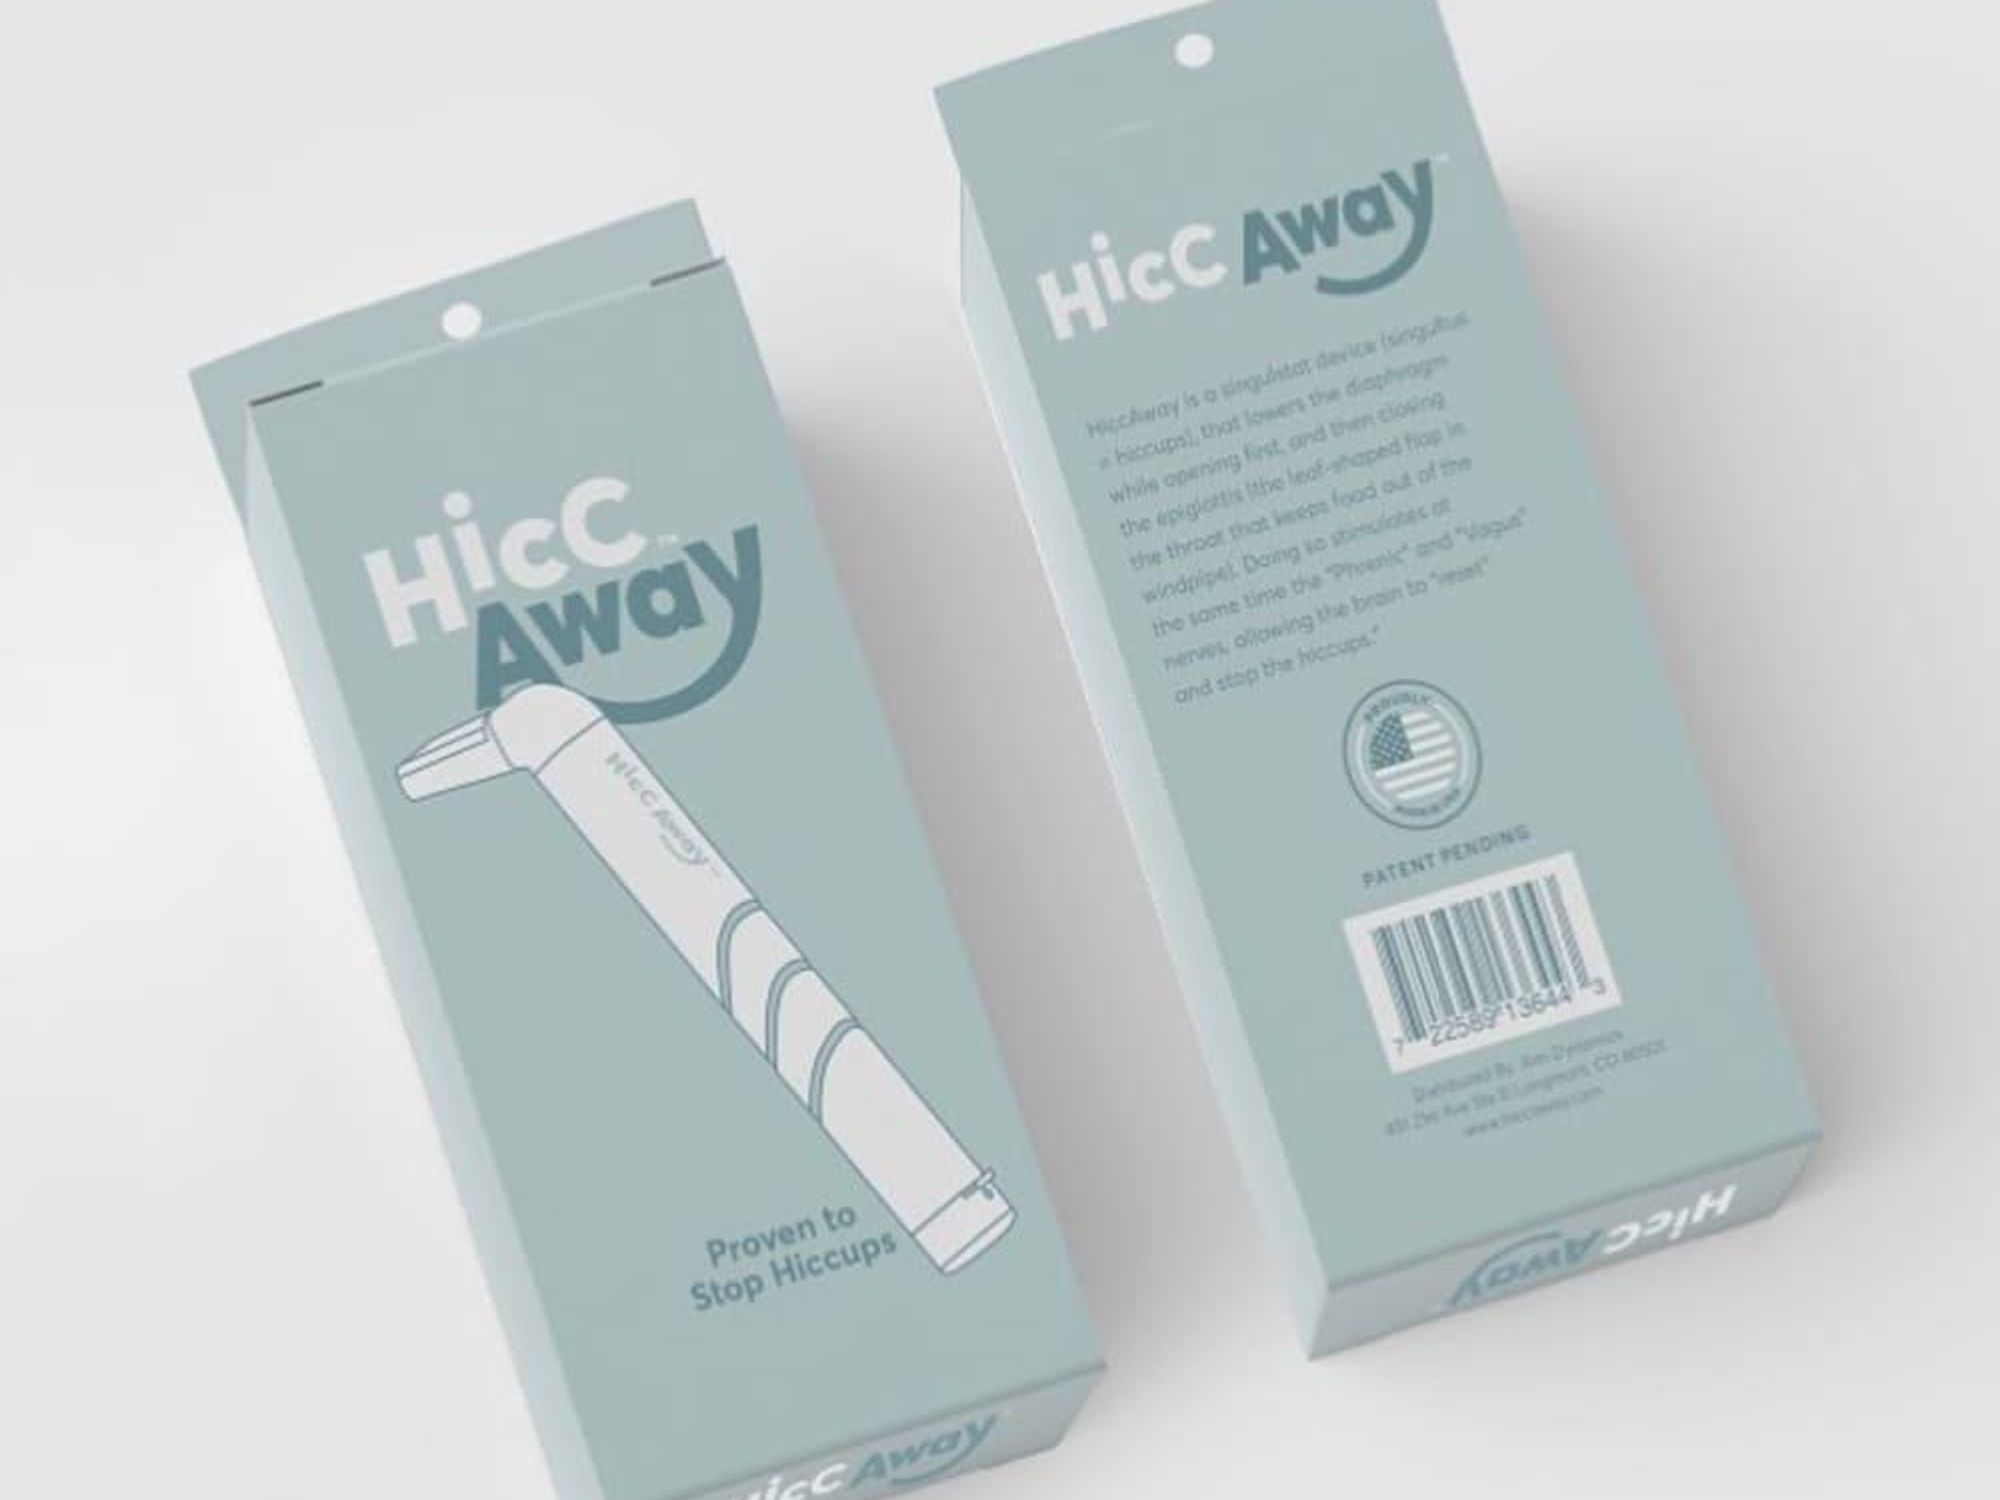 HiccAway, Hiccup Curing Device, Stops Hiccups Instantly, Hiccup Straw